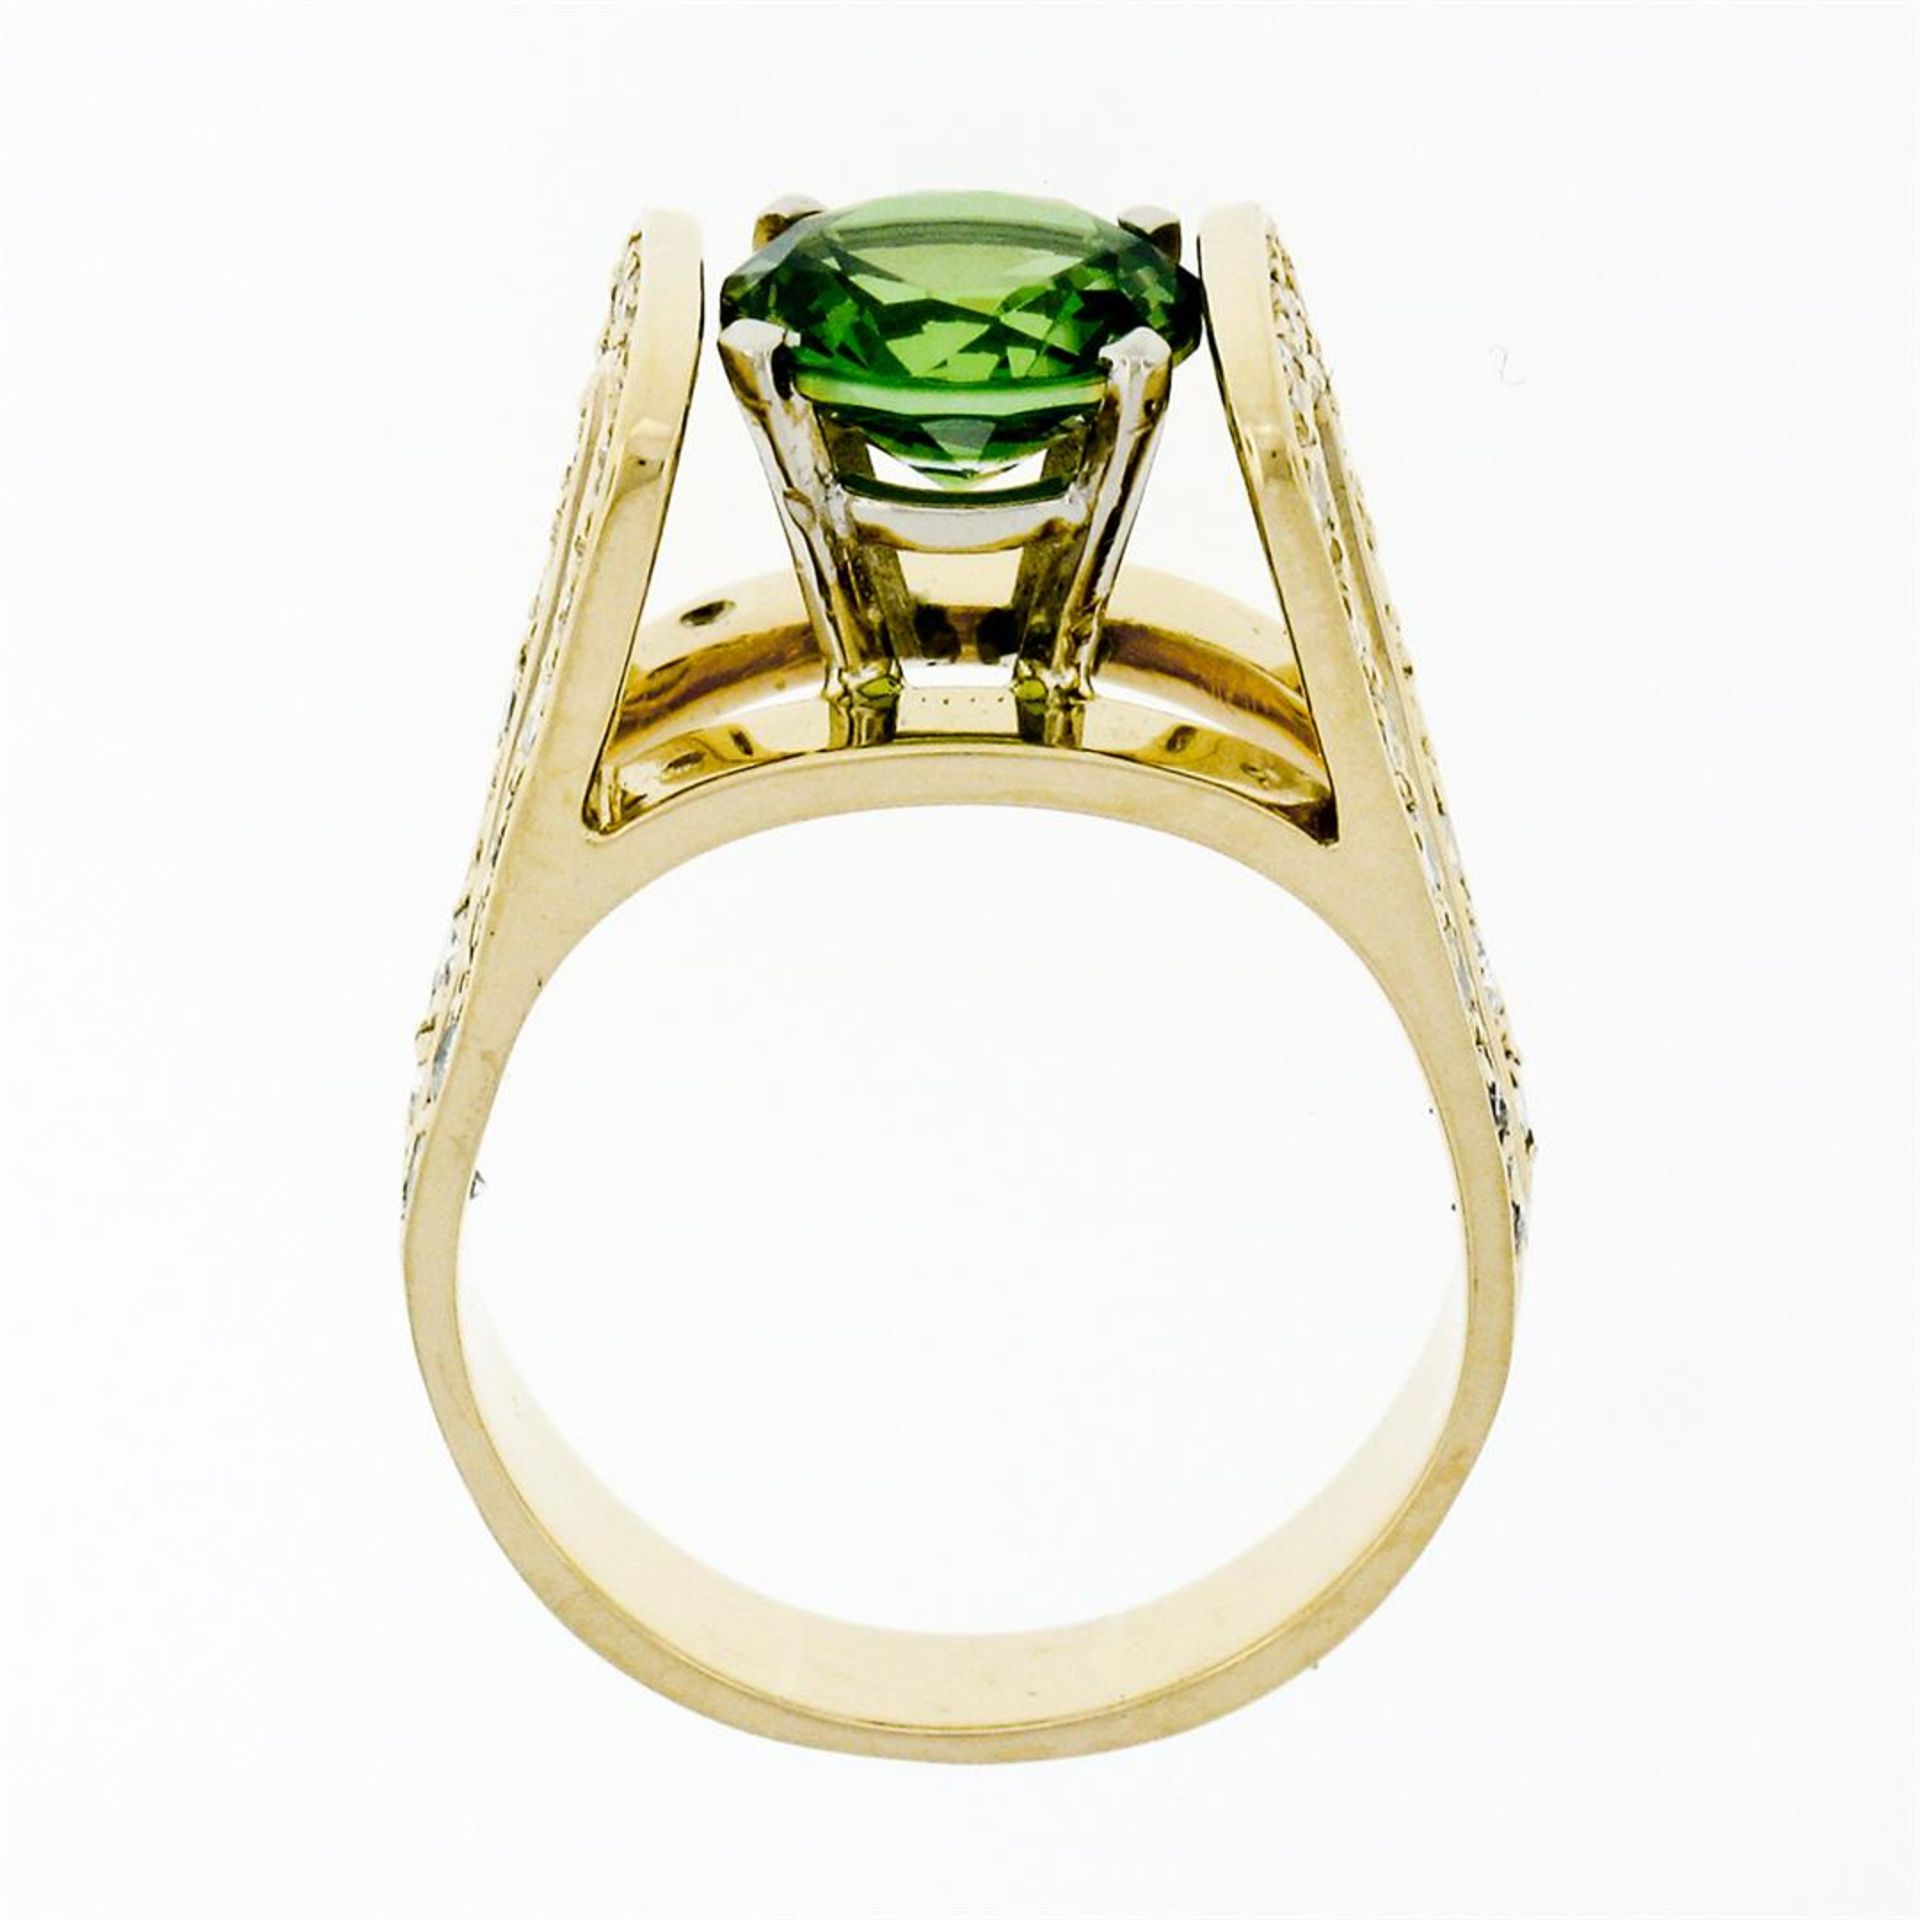 14k Yellow Gold 3.0ctw Round Peridot Solitaire & Ideal Cut Diamond Cocktail Ring - Image 6 of 9